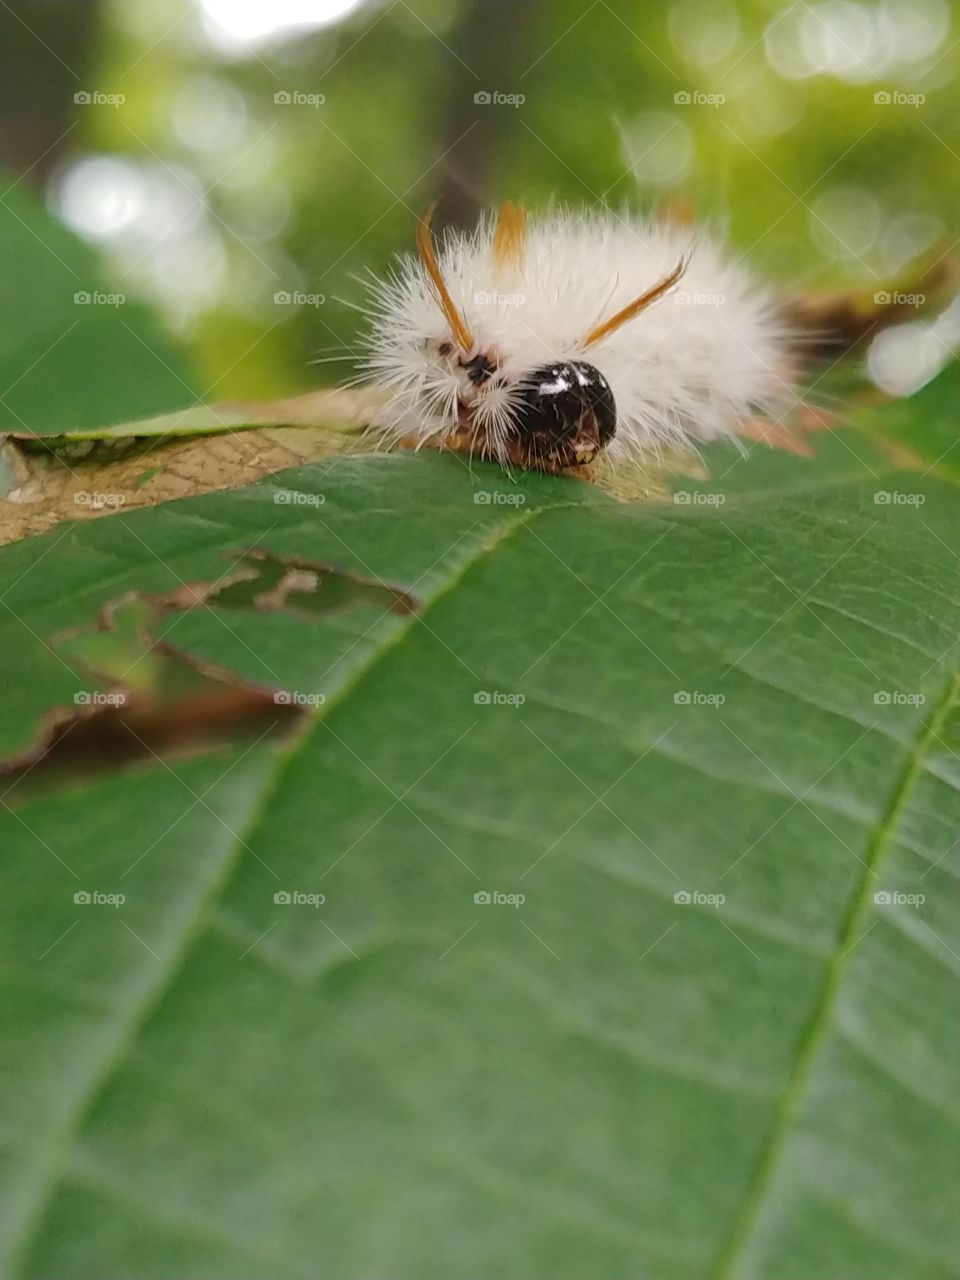 Close-up of a tiny white, fluffy wooly worm with big black eyes sitting on a dark green leaf with holes in it.